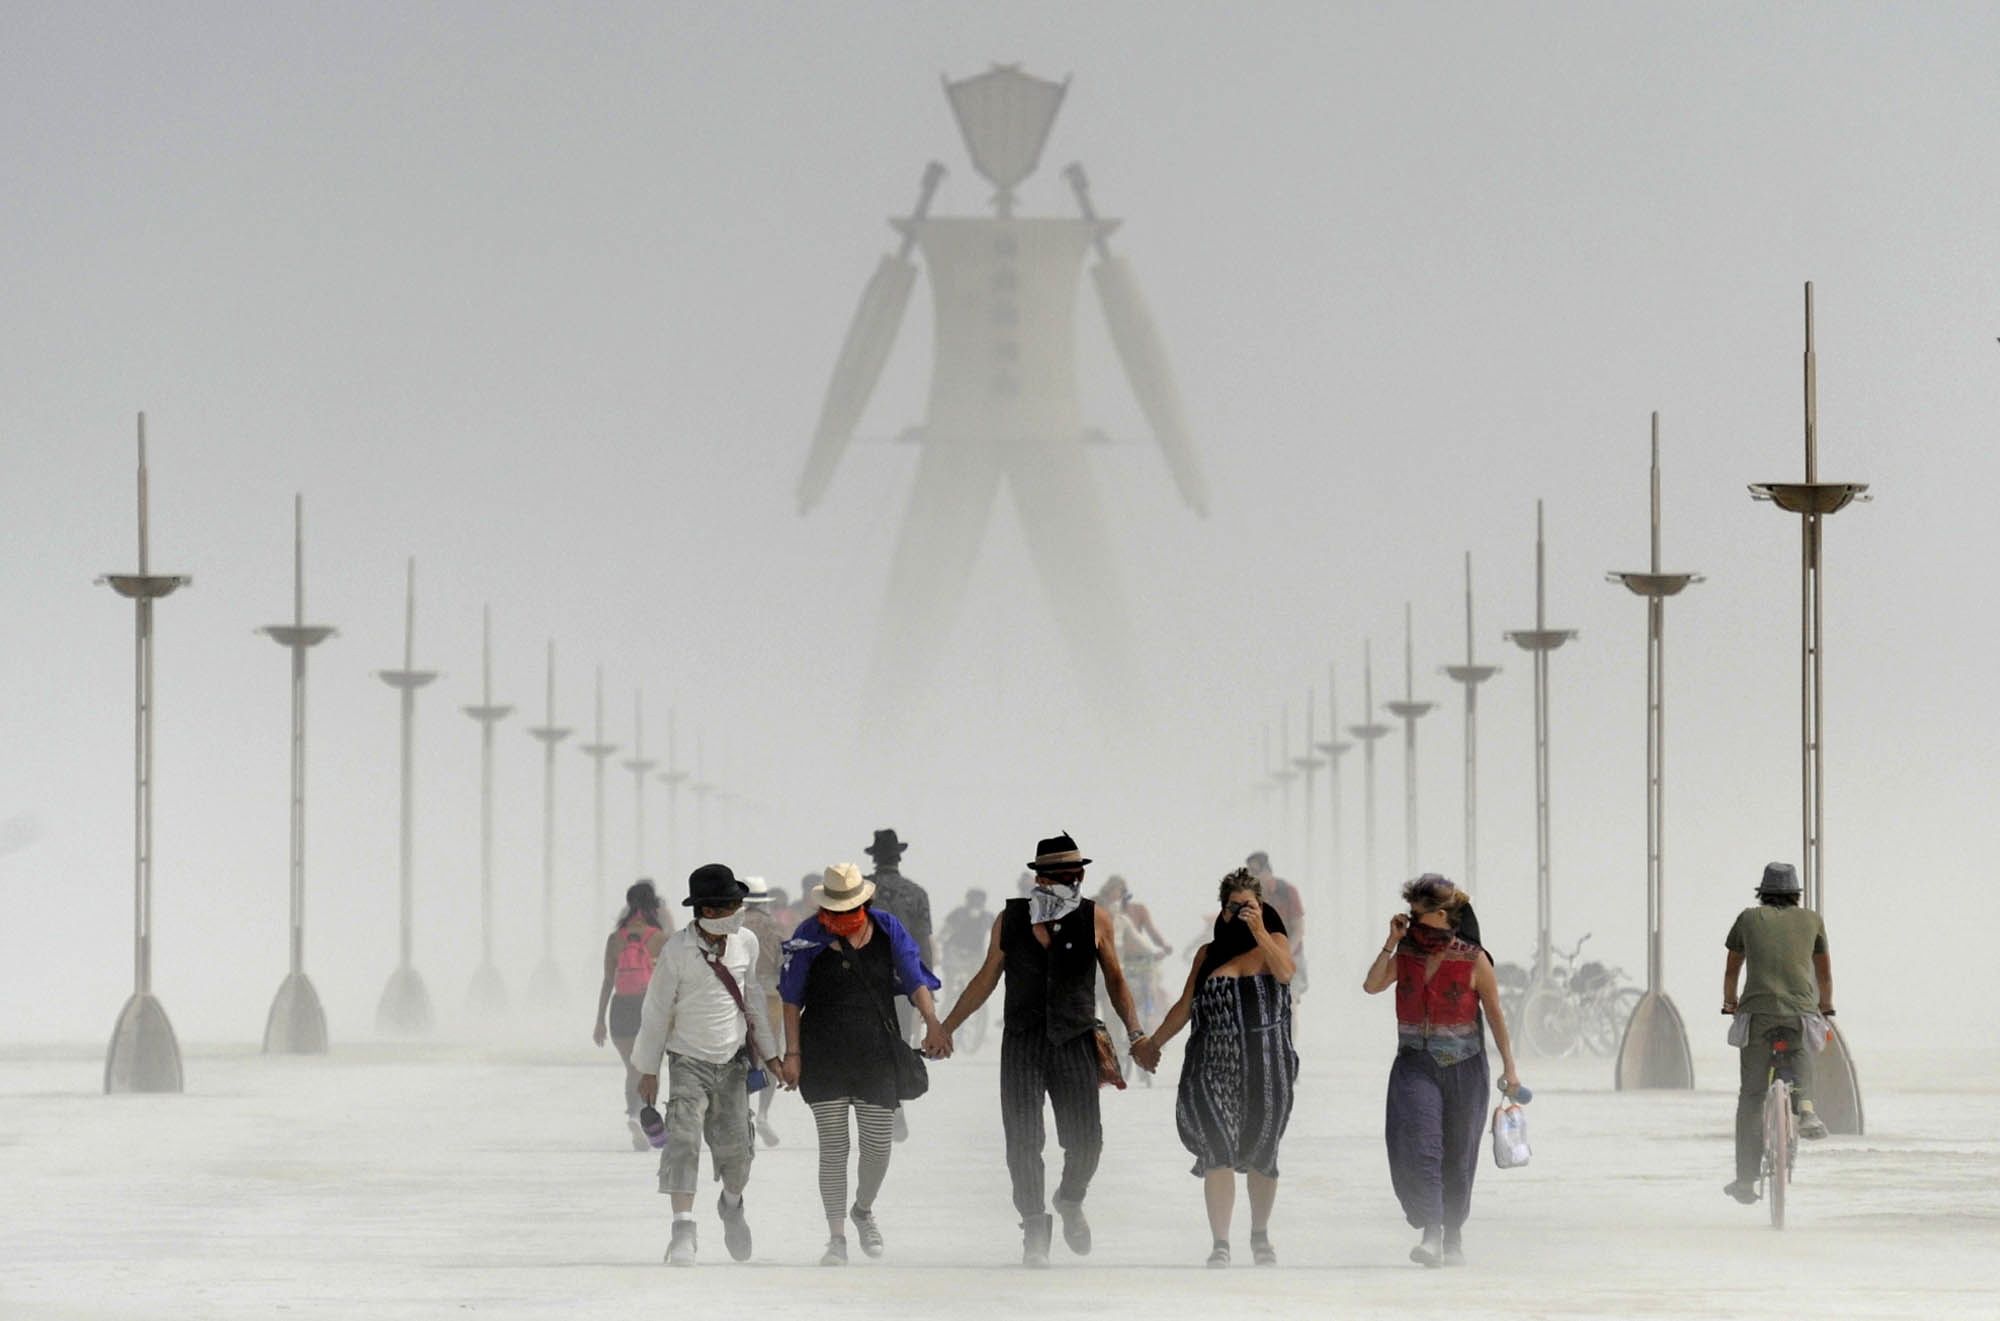 Participants walk through dust at the annual Burning Man event in the Black Rock Desert of Gerlach, Nev., on Aug. 29, 2014. (Andy Barron—AP)